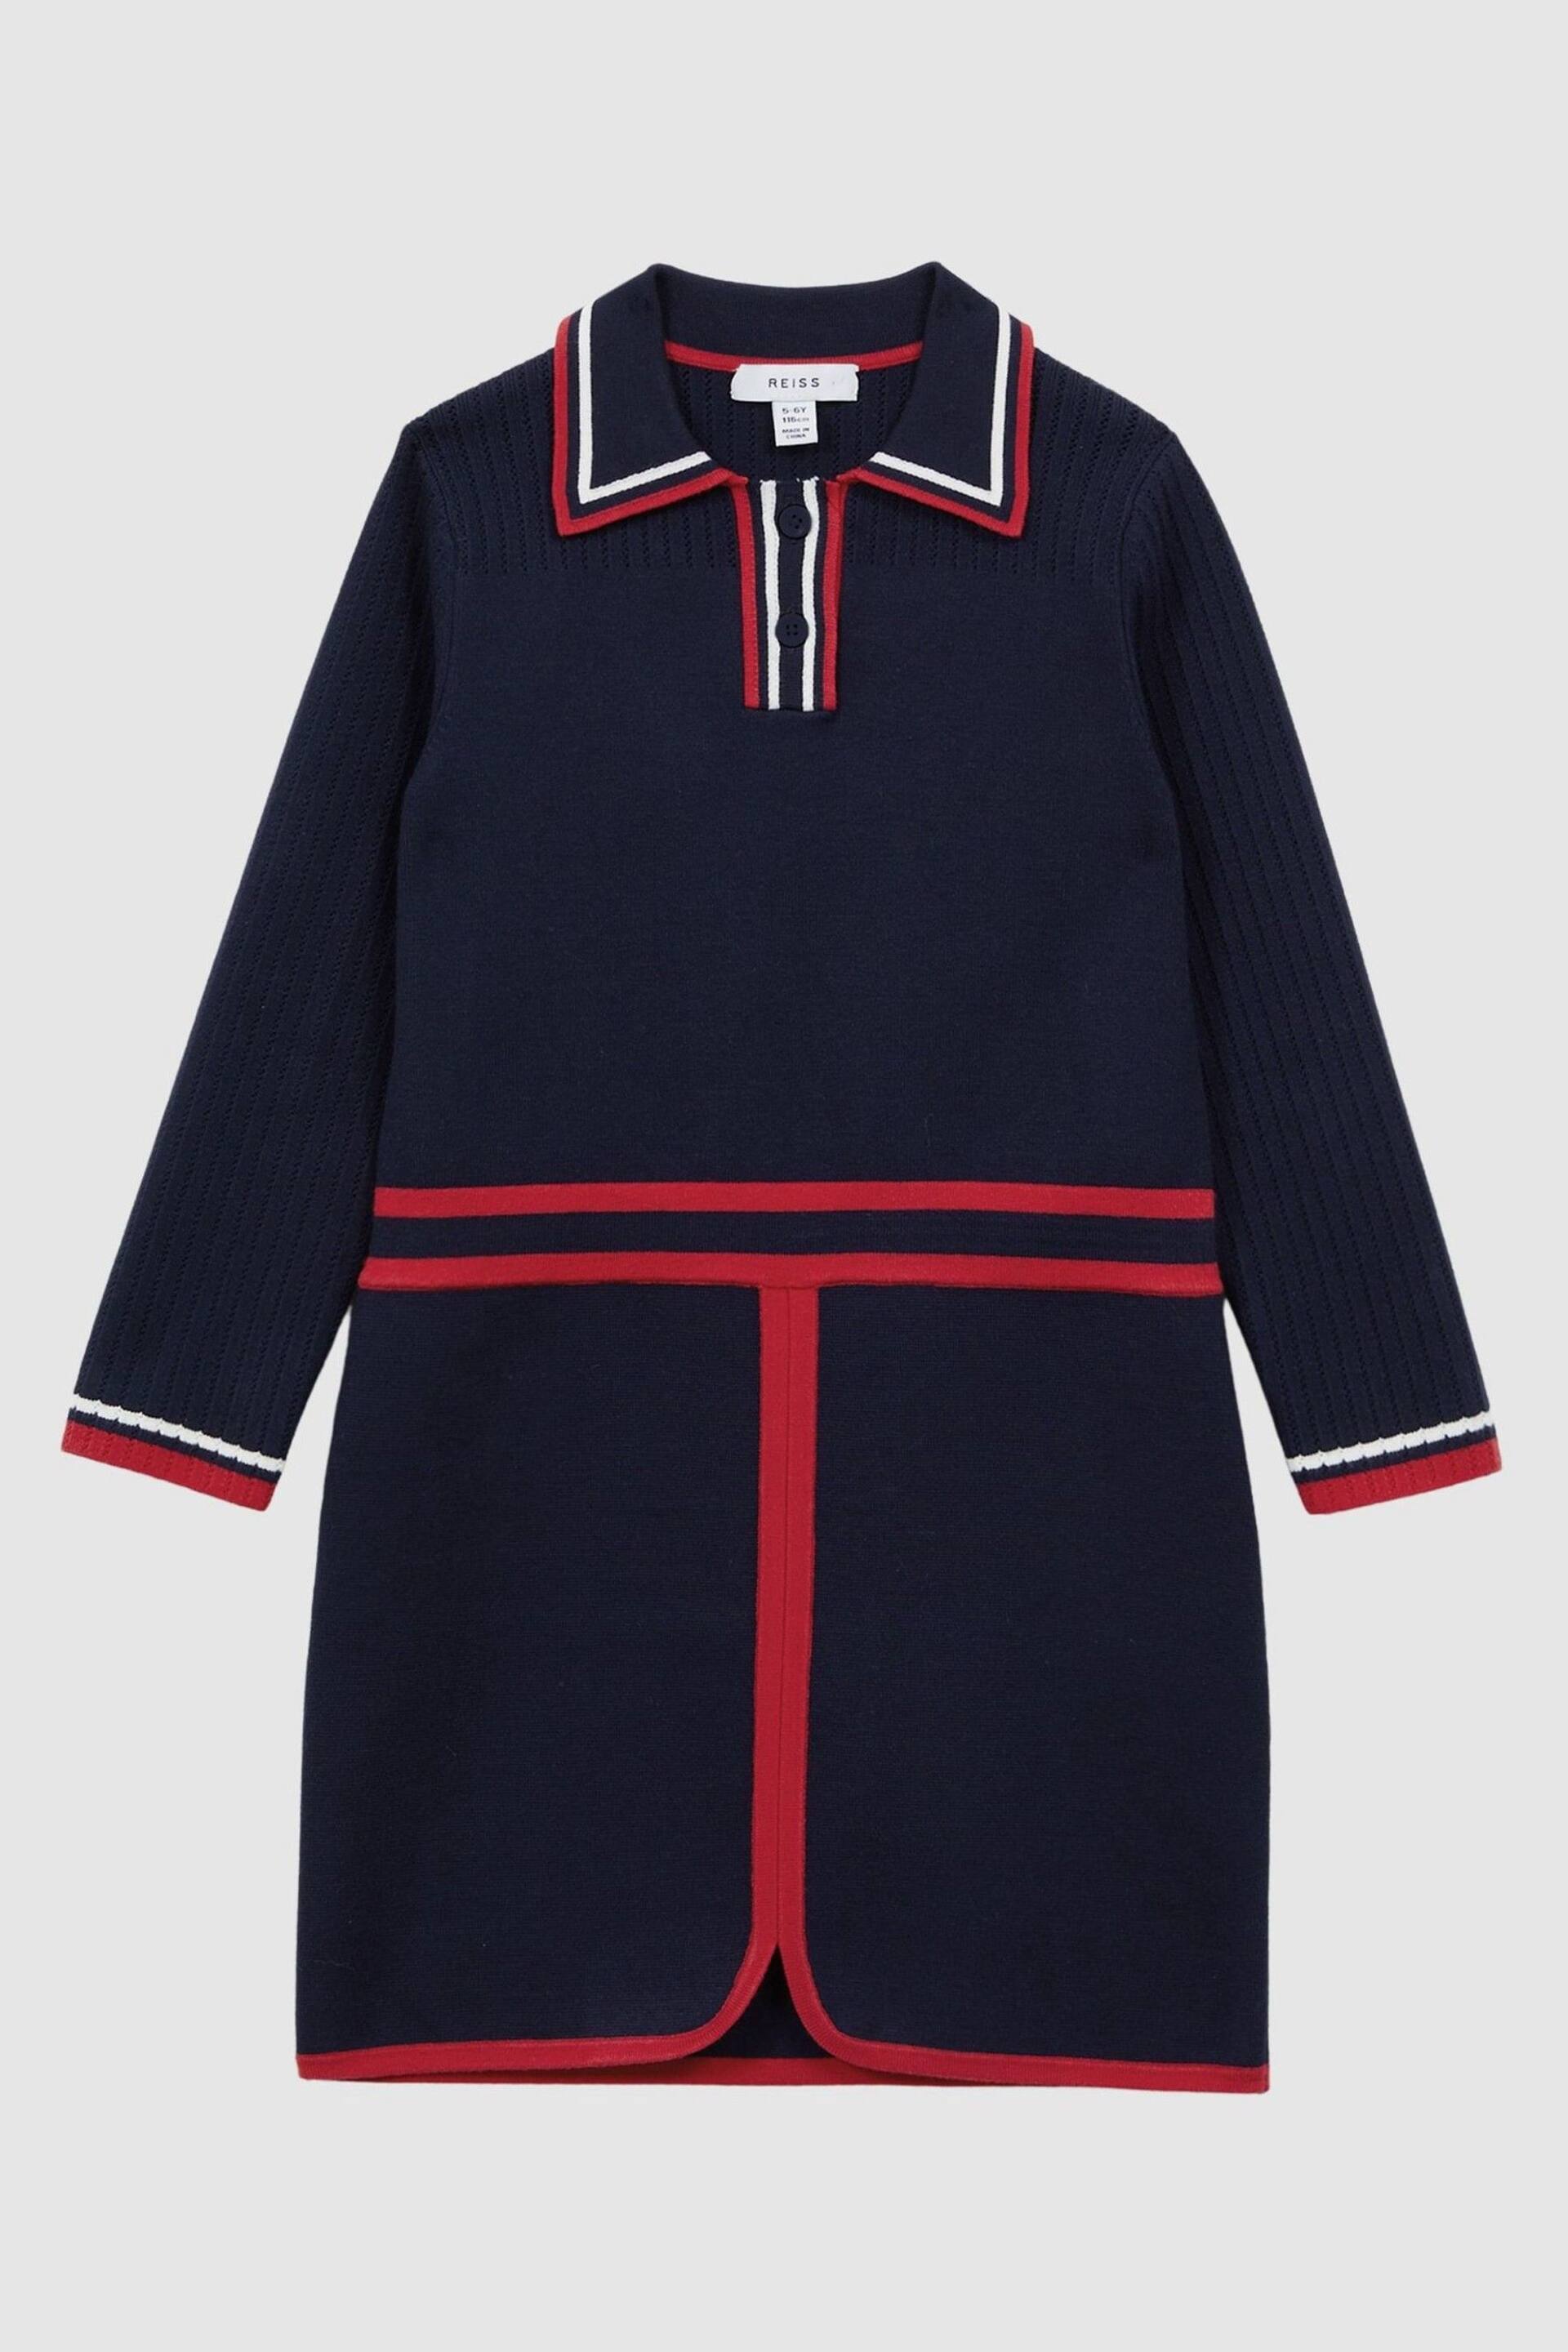 Reiss Navy Ruby Senior Knitted Polo Dress - Image 2 of 6